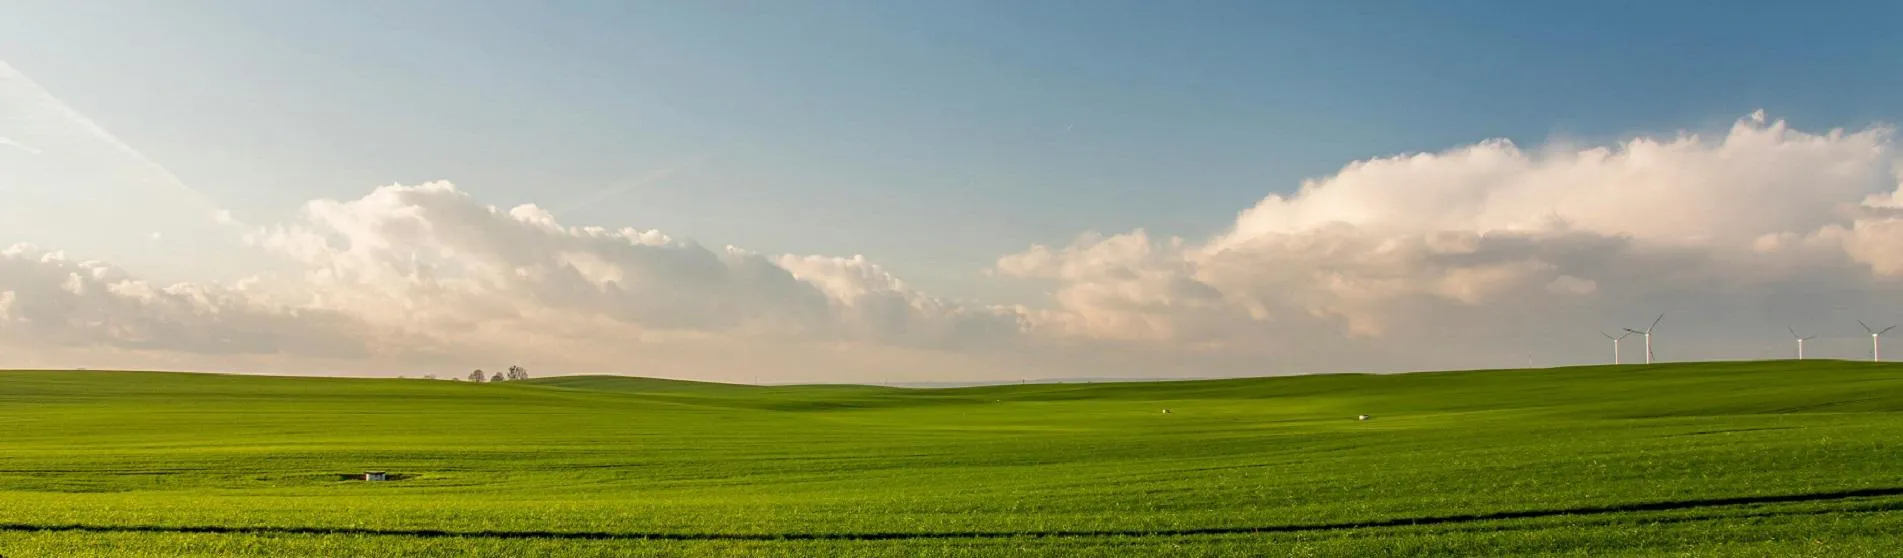 image of blue sky and green field